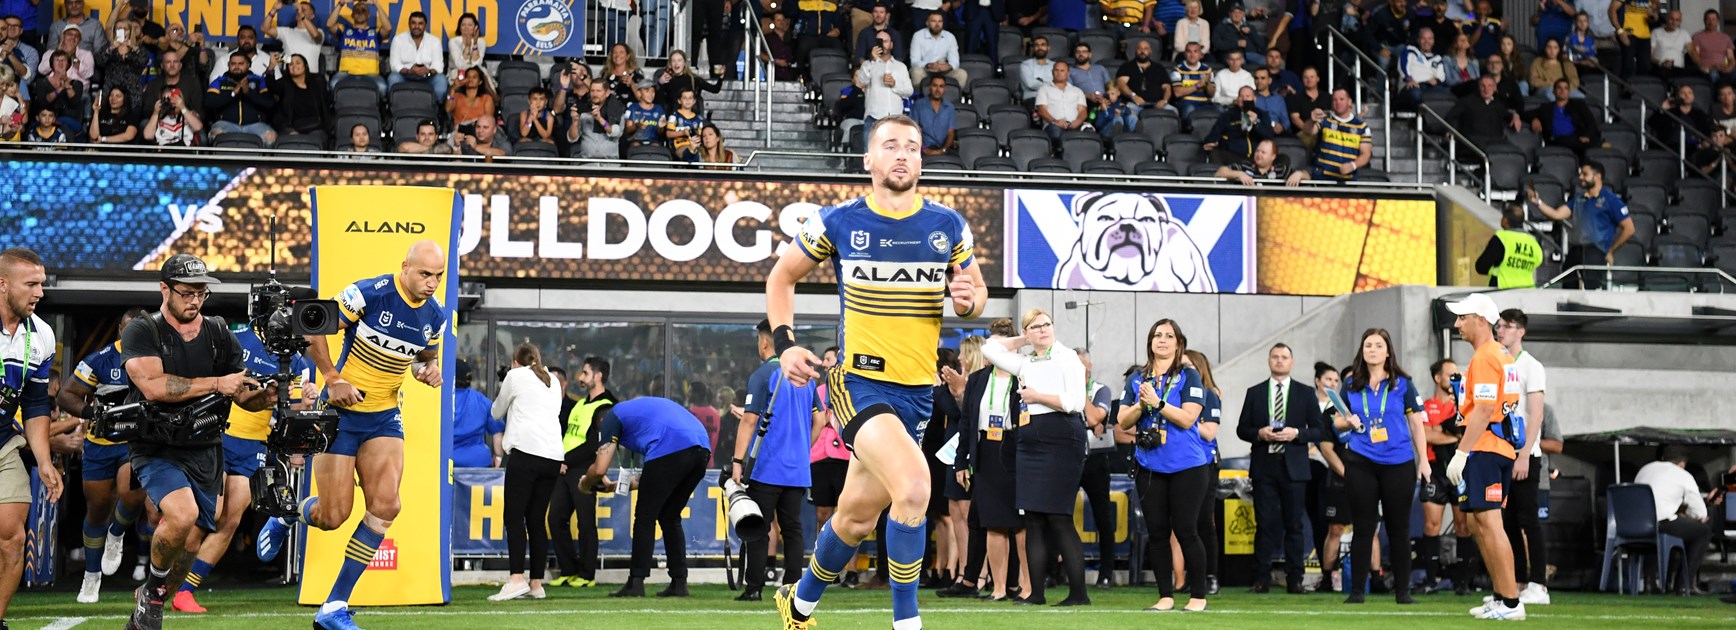 Clint Gutherson leads the Eels onto the field.